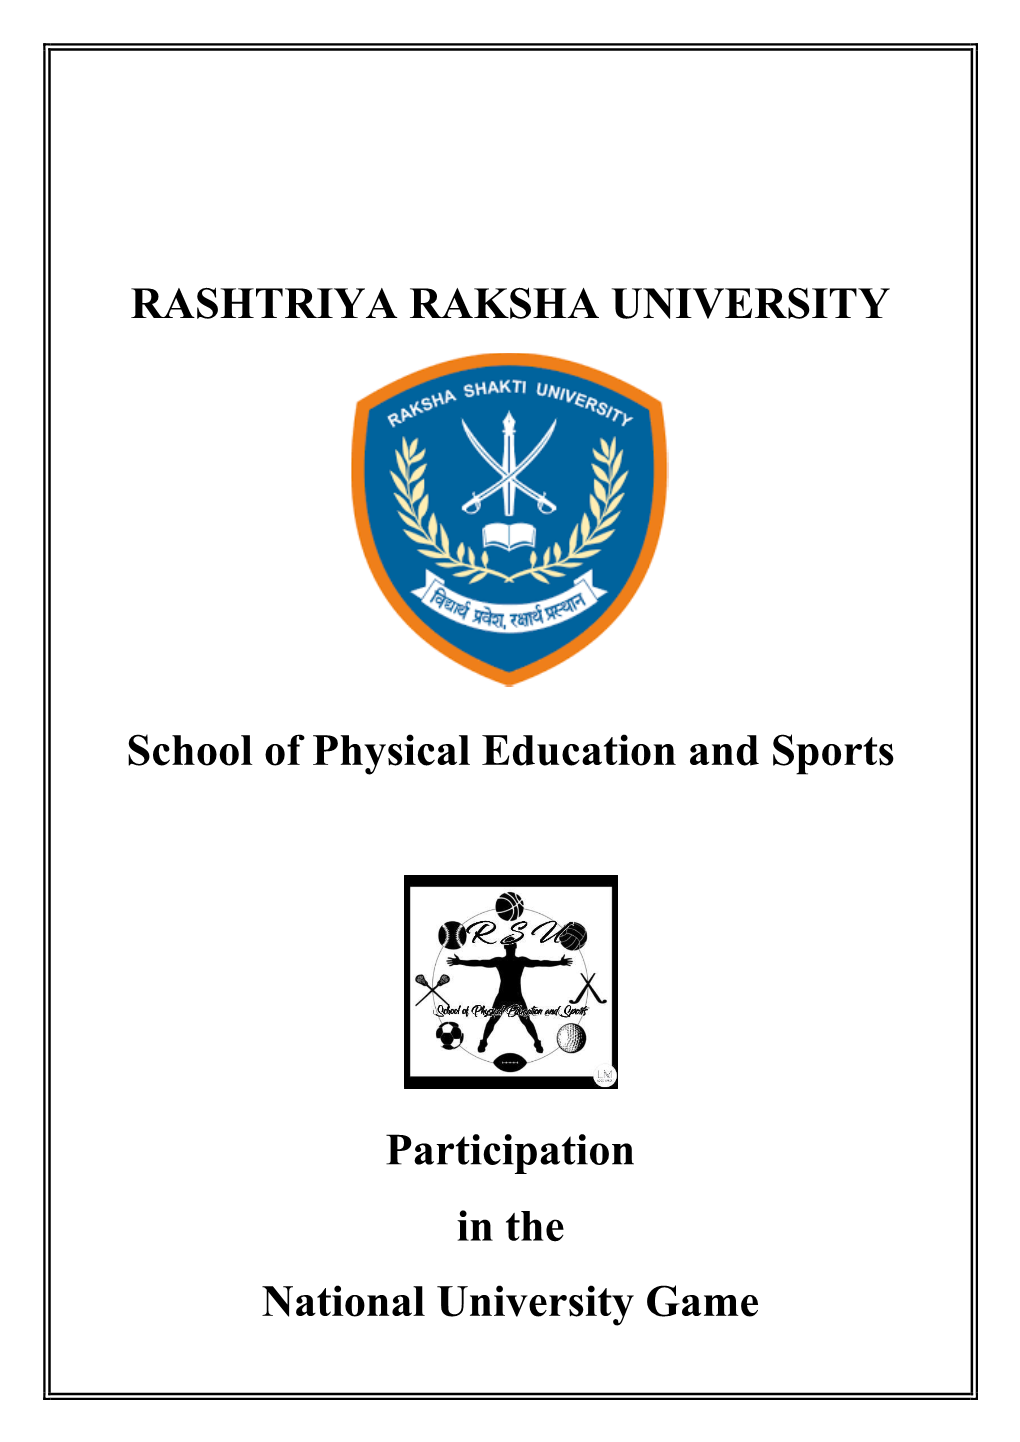 Participation of RRU in the National University Games